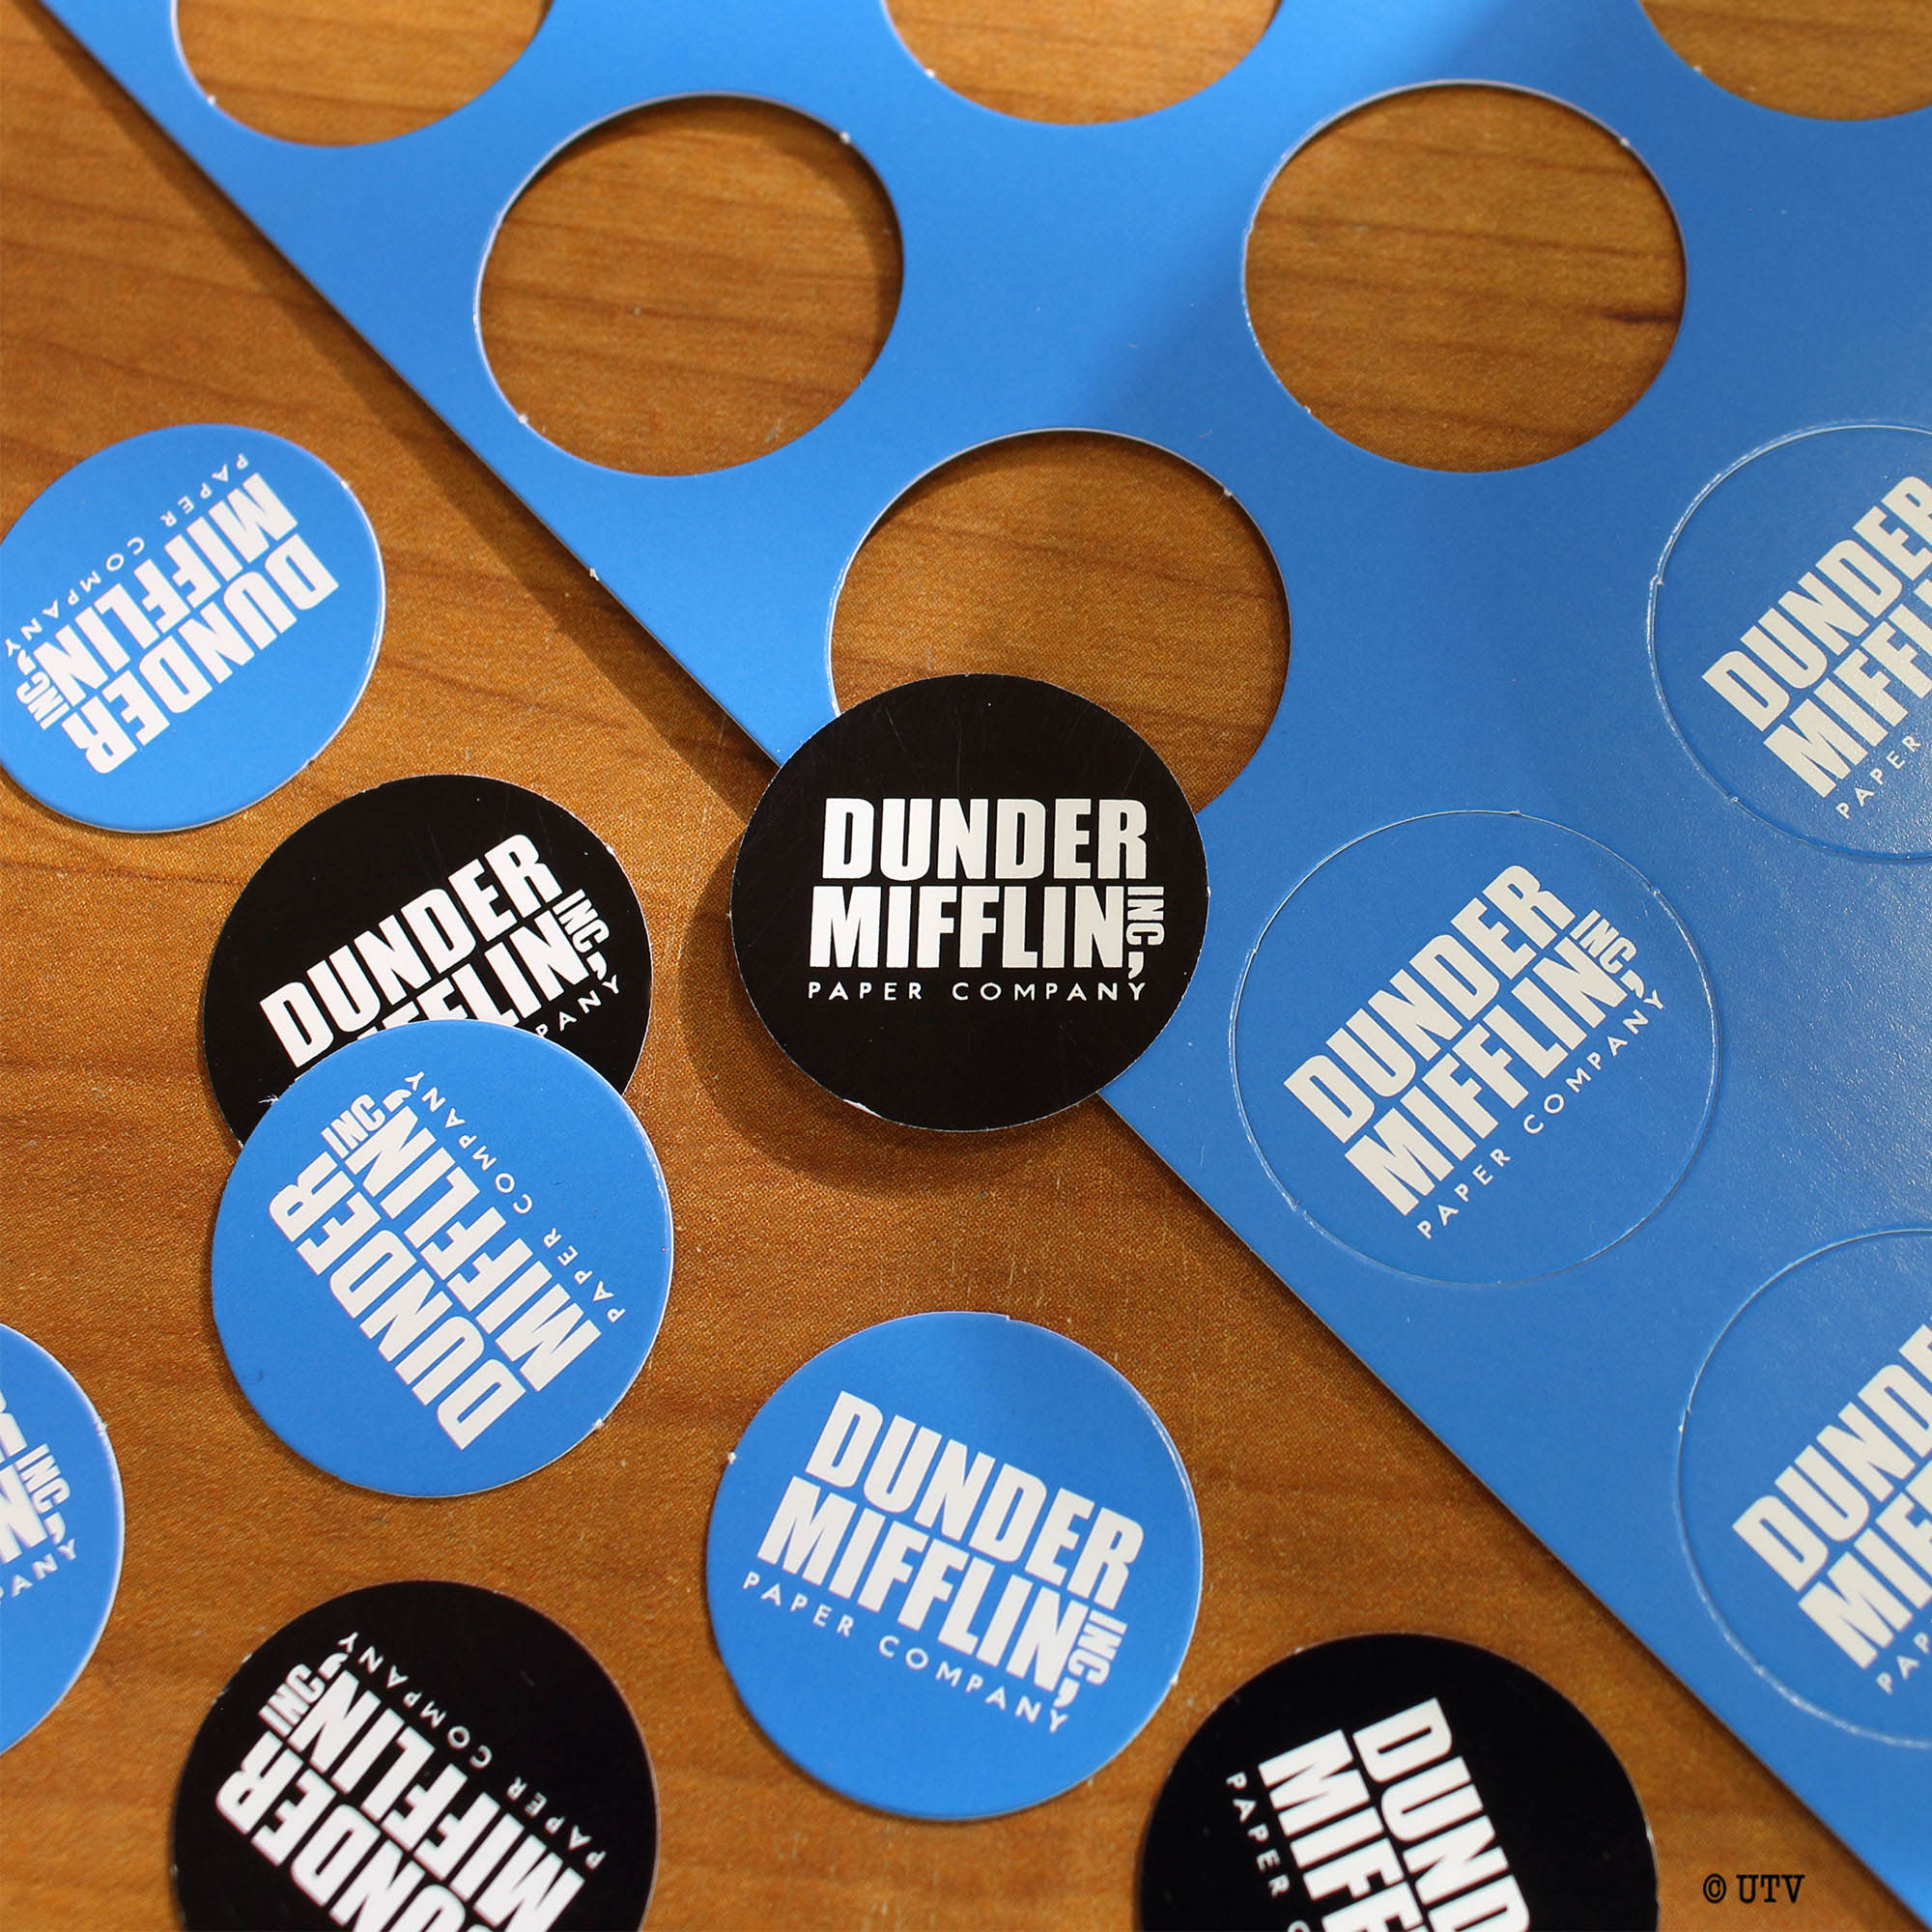 The Office Dunder Mifflin Playing Cards